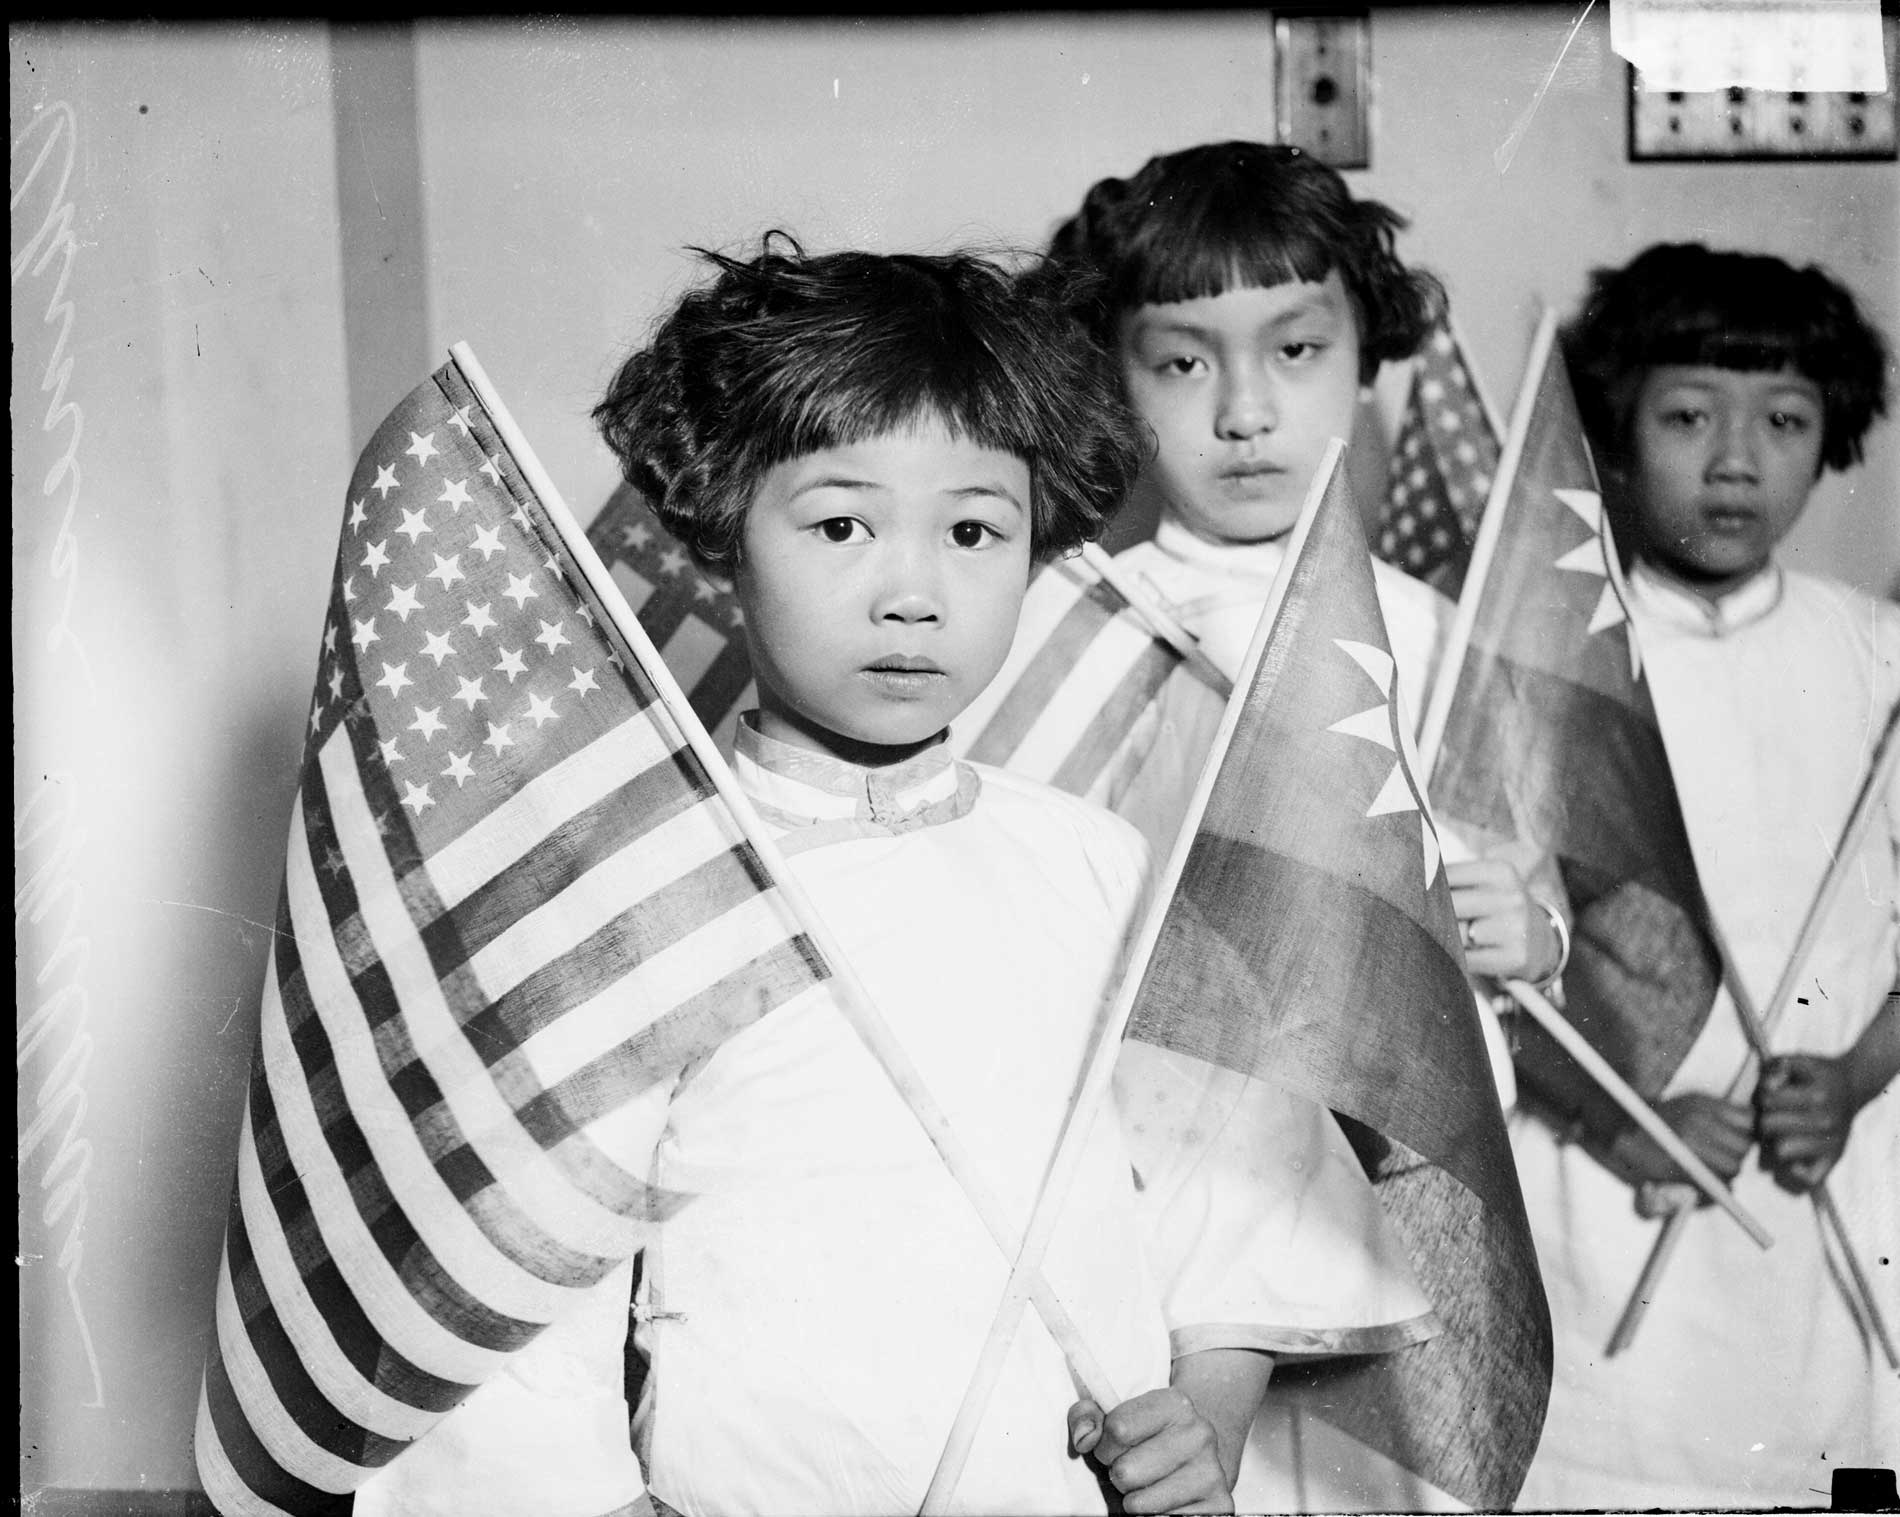 Children with flags